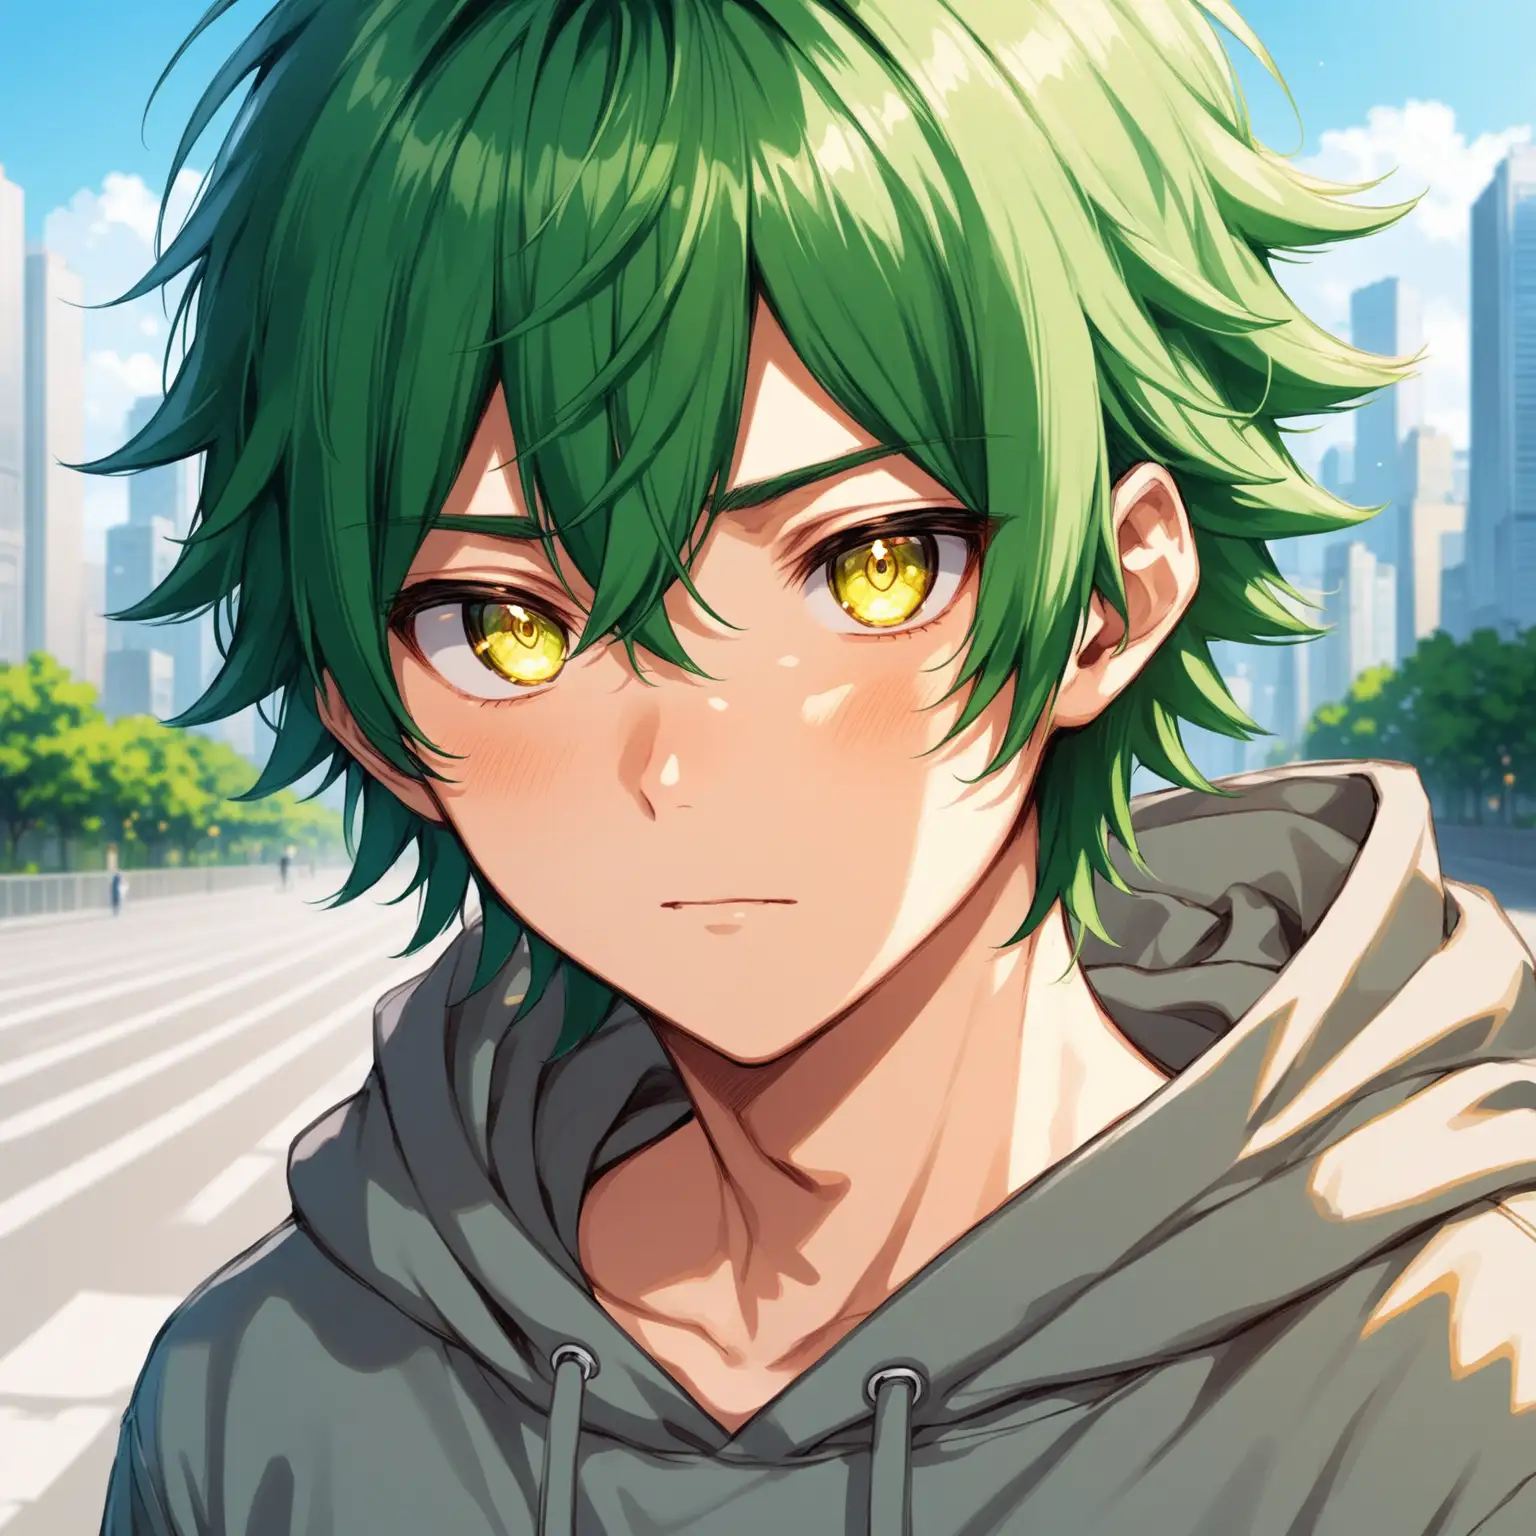 Draw a cute anime boy, high quality, close up, natural lighting, outdoors, city, grey hoodie, wavy green hair, gold eyes, deadpan face